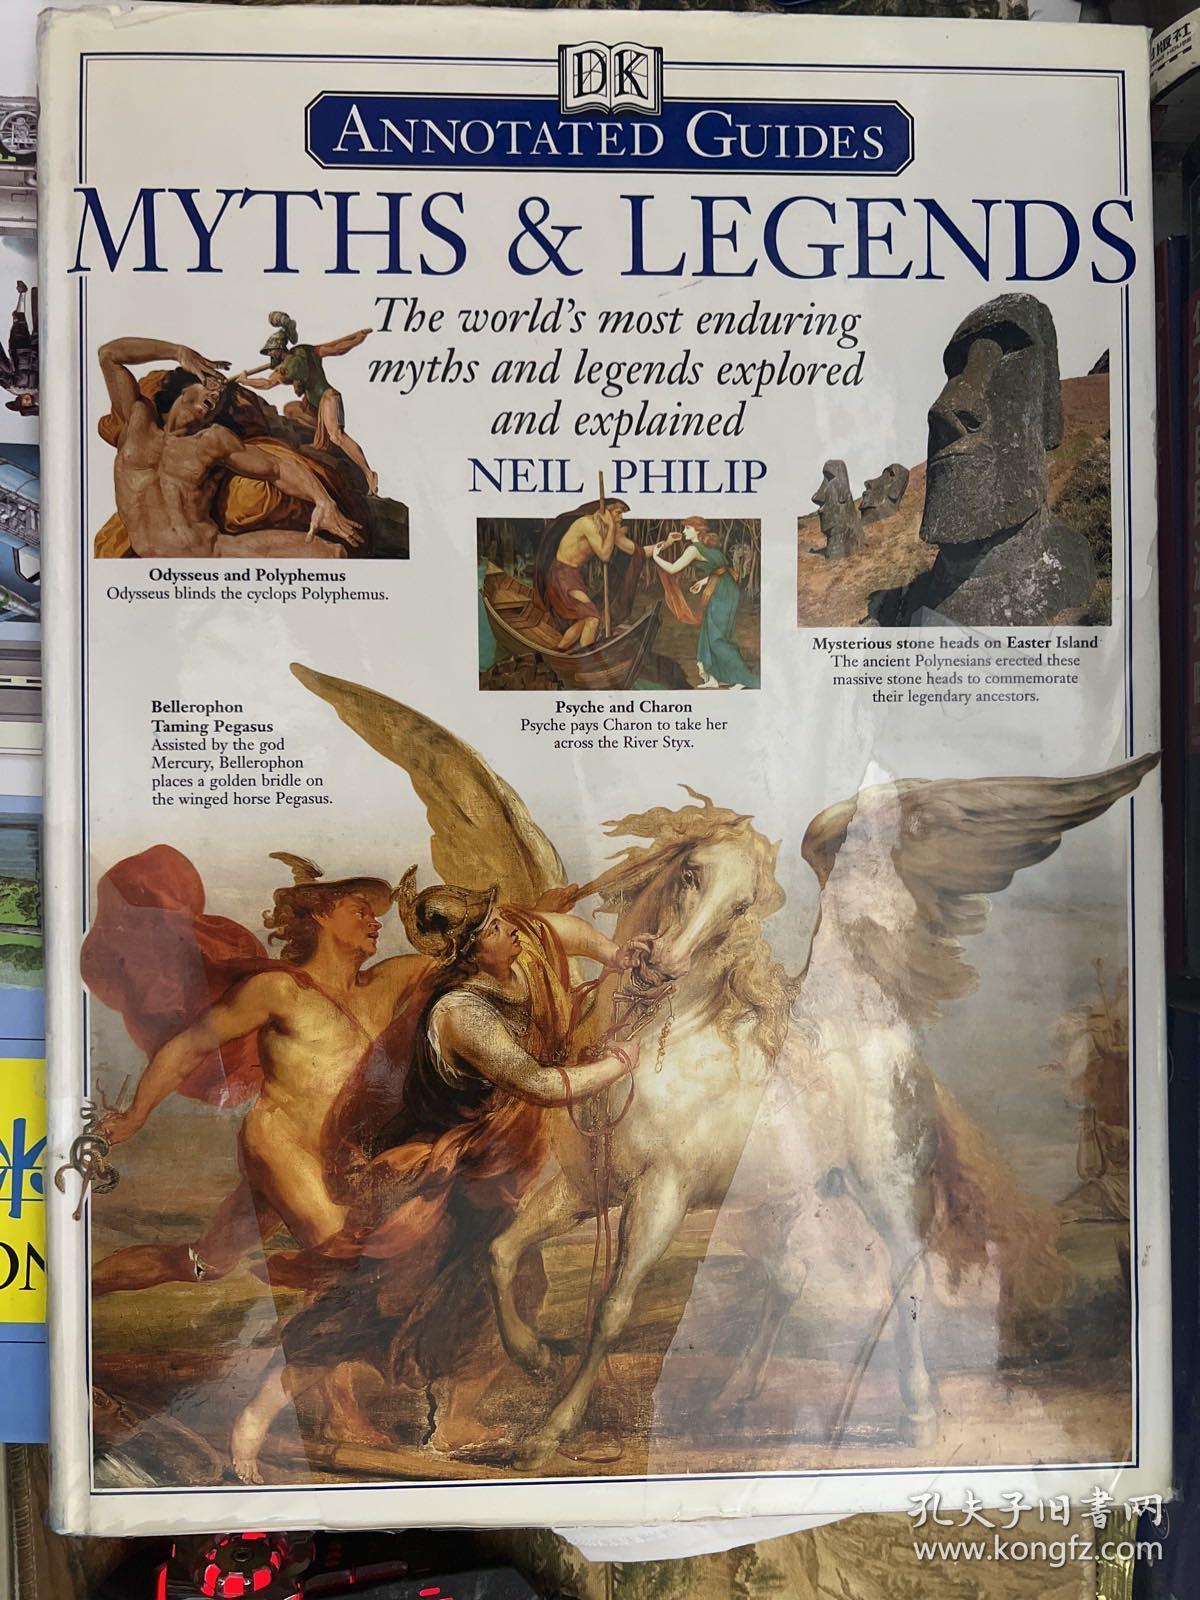 Annotated Myths and Legends (Annotated Guides)